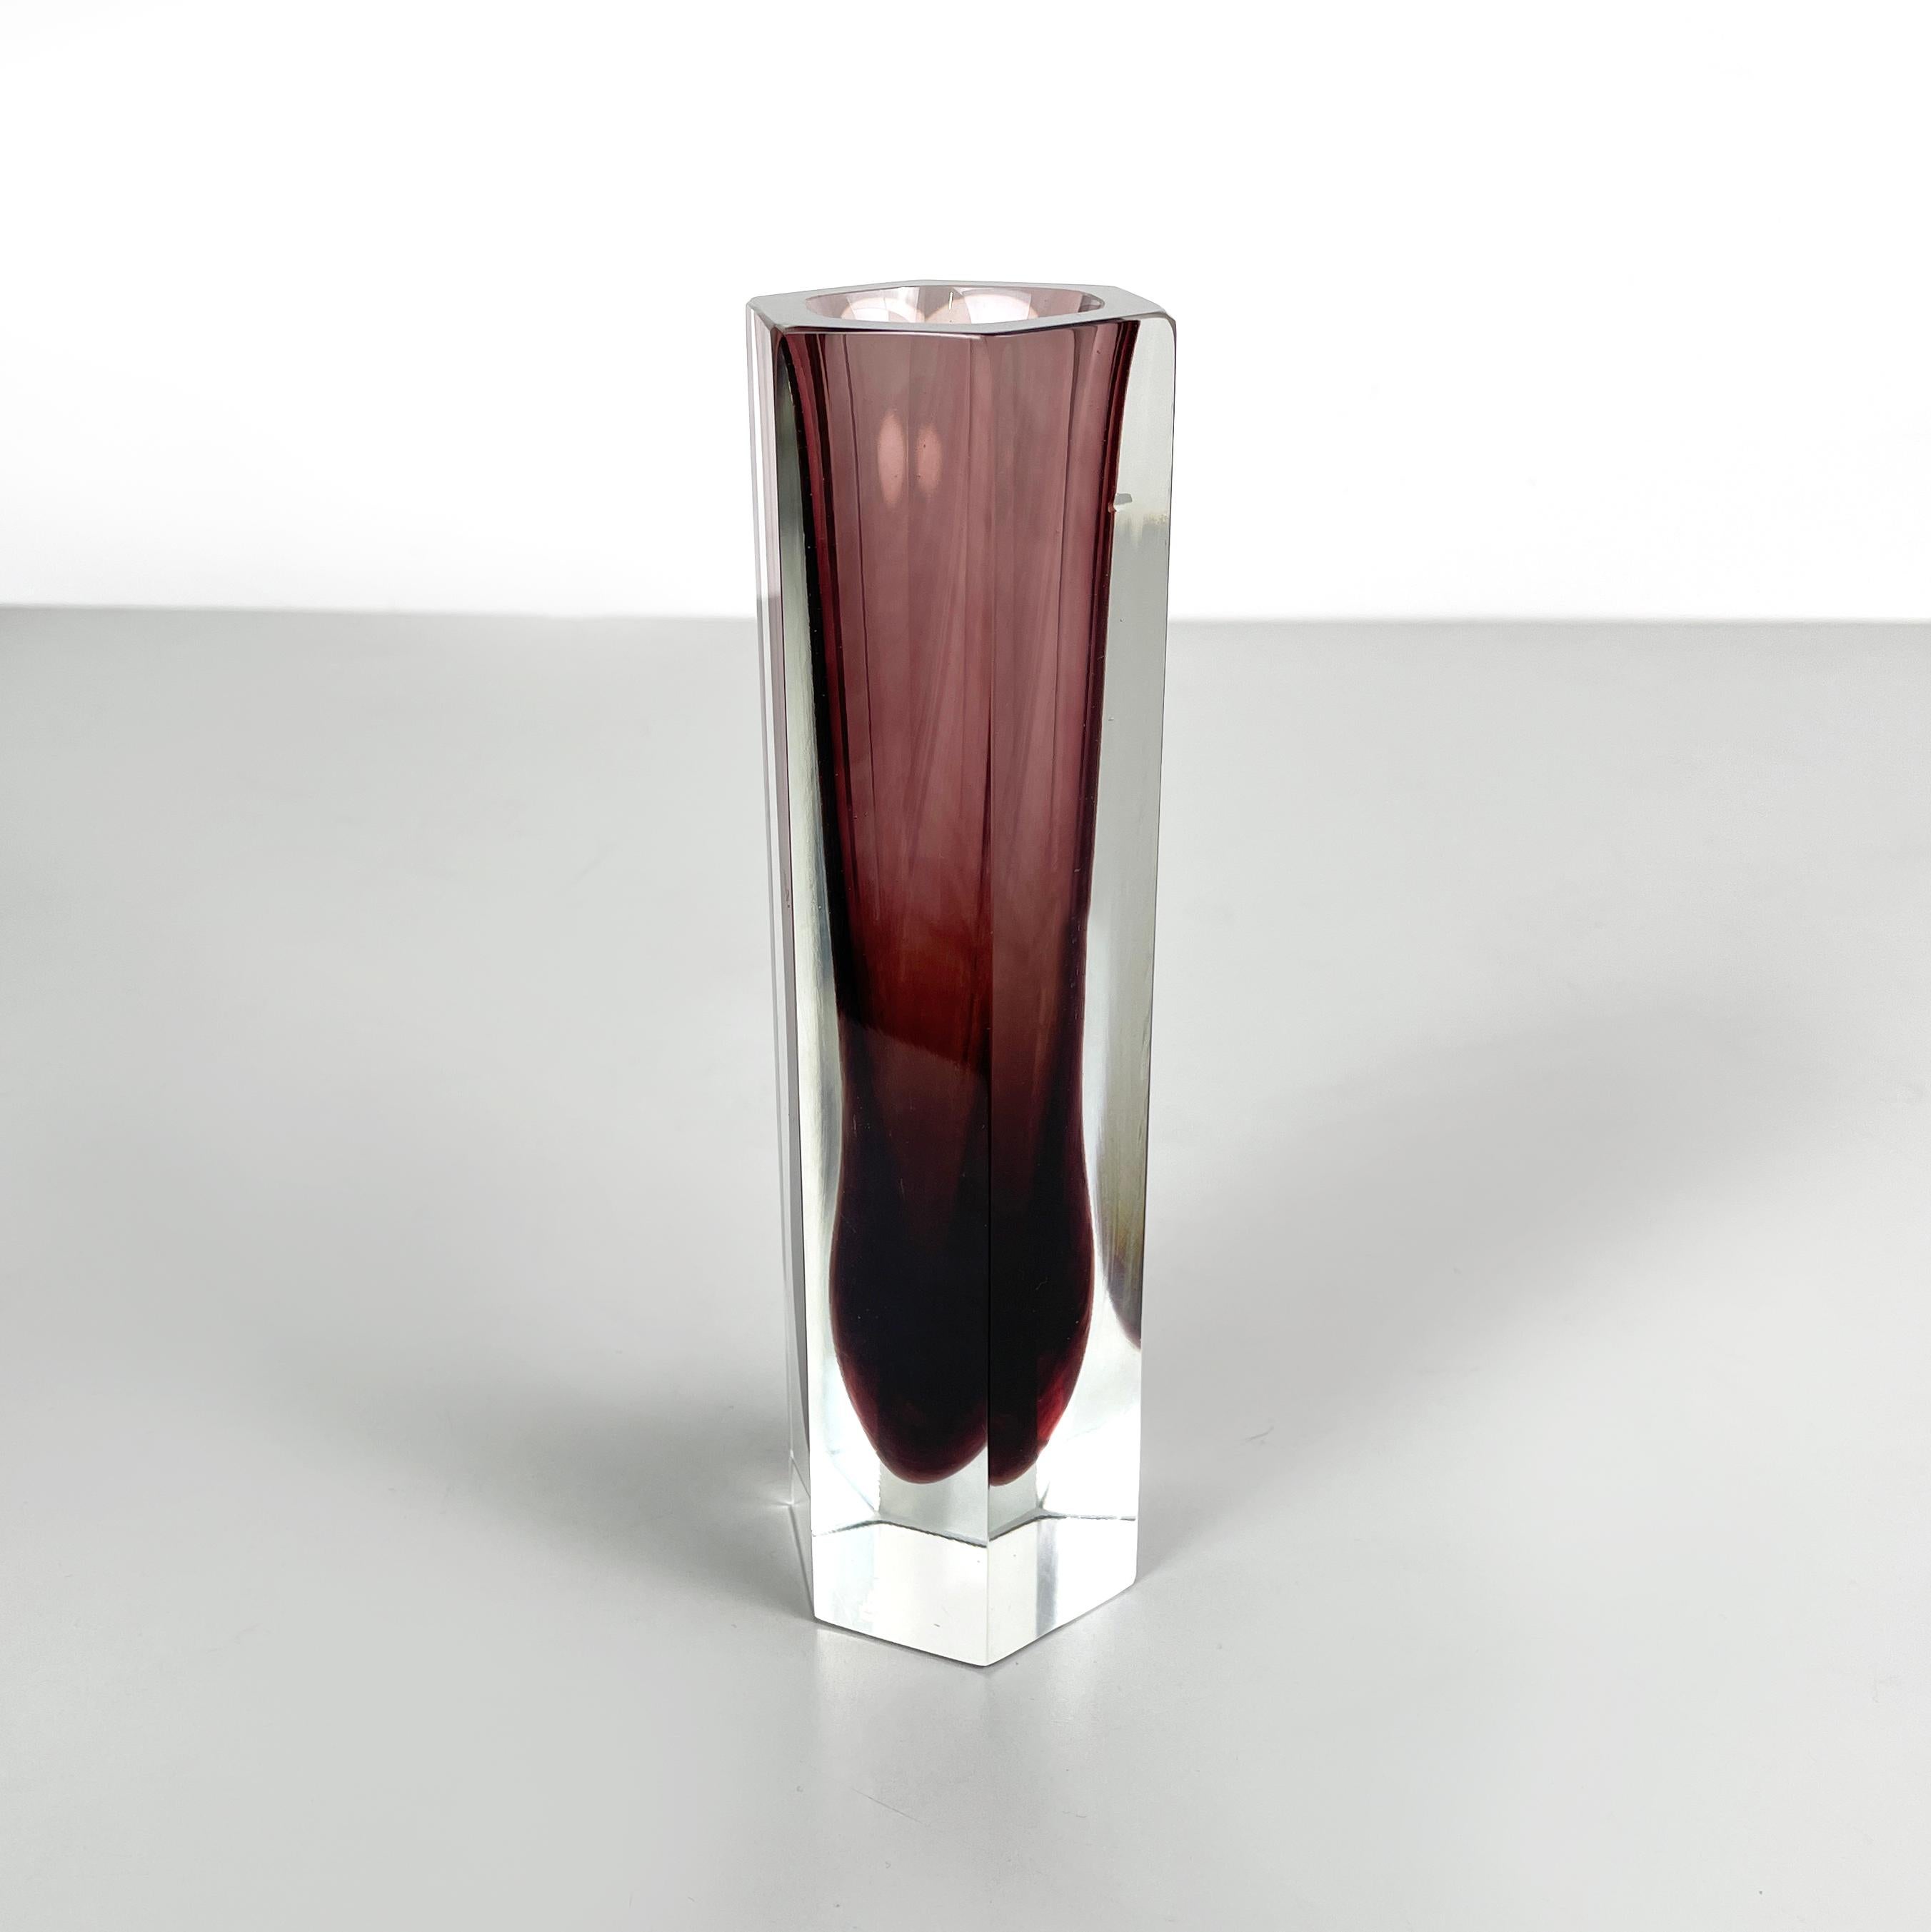 Italian modern Hexagonal burgundy Murano glass vase by i Sommersi series, 1970s
Fantastic and vintage hexagonal base vase entirely in thick Murano glass. The glass has different shades in shades of red burgundy on the inside and transparent on the